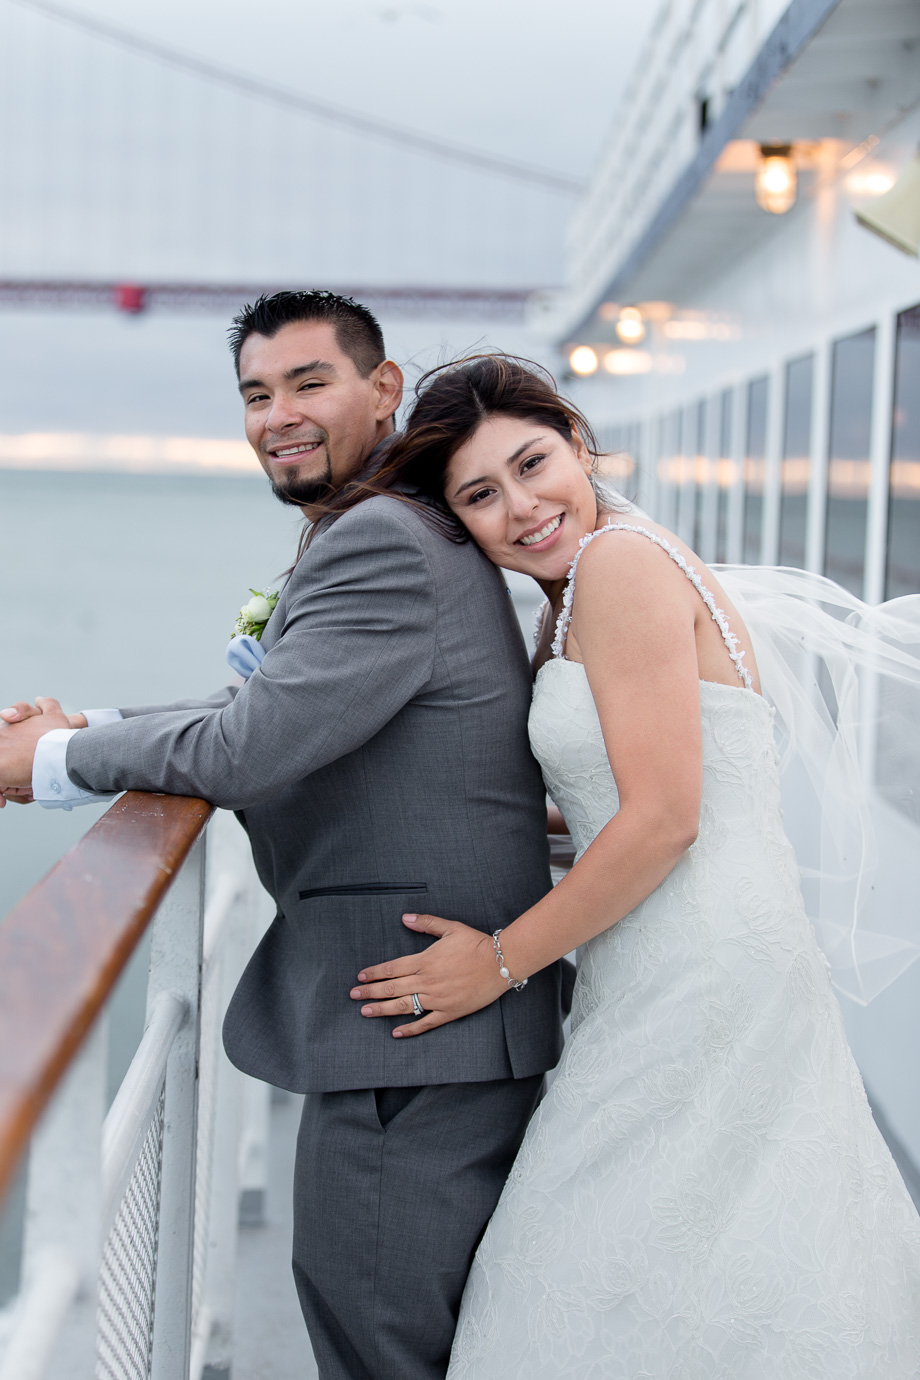 Portrait of bride behind groom on California Hornblower cruise ship with Golden Gate Bridge in the background